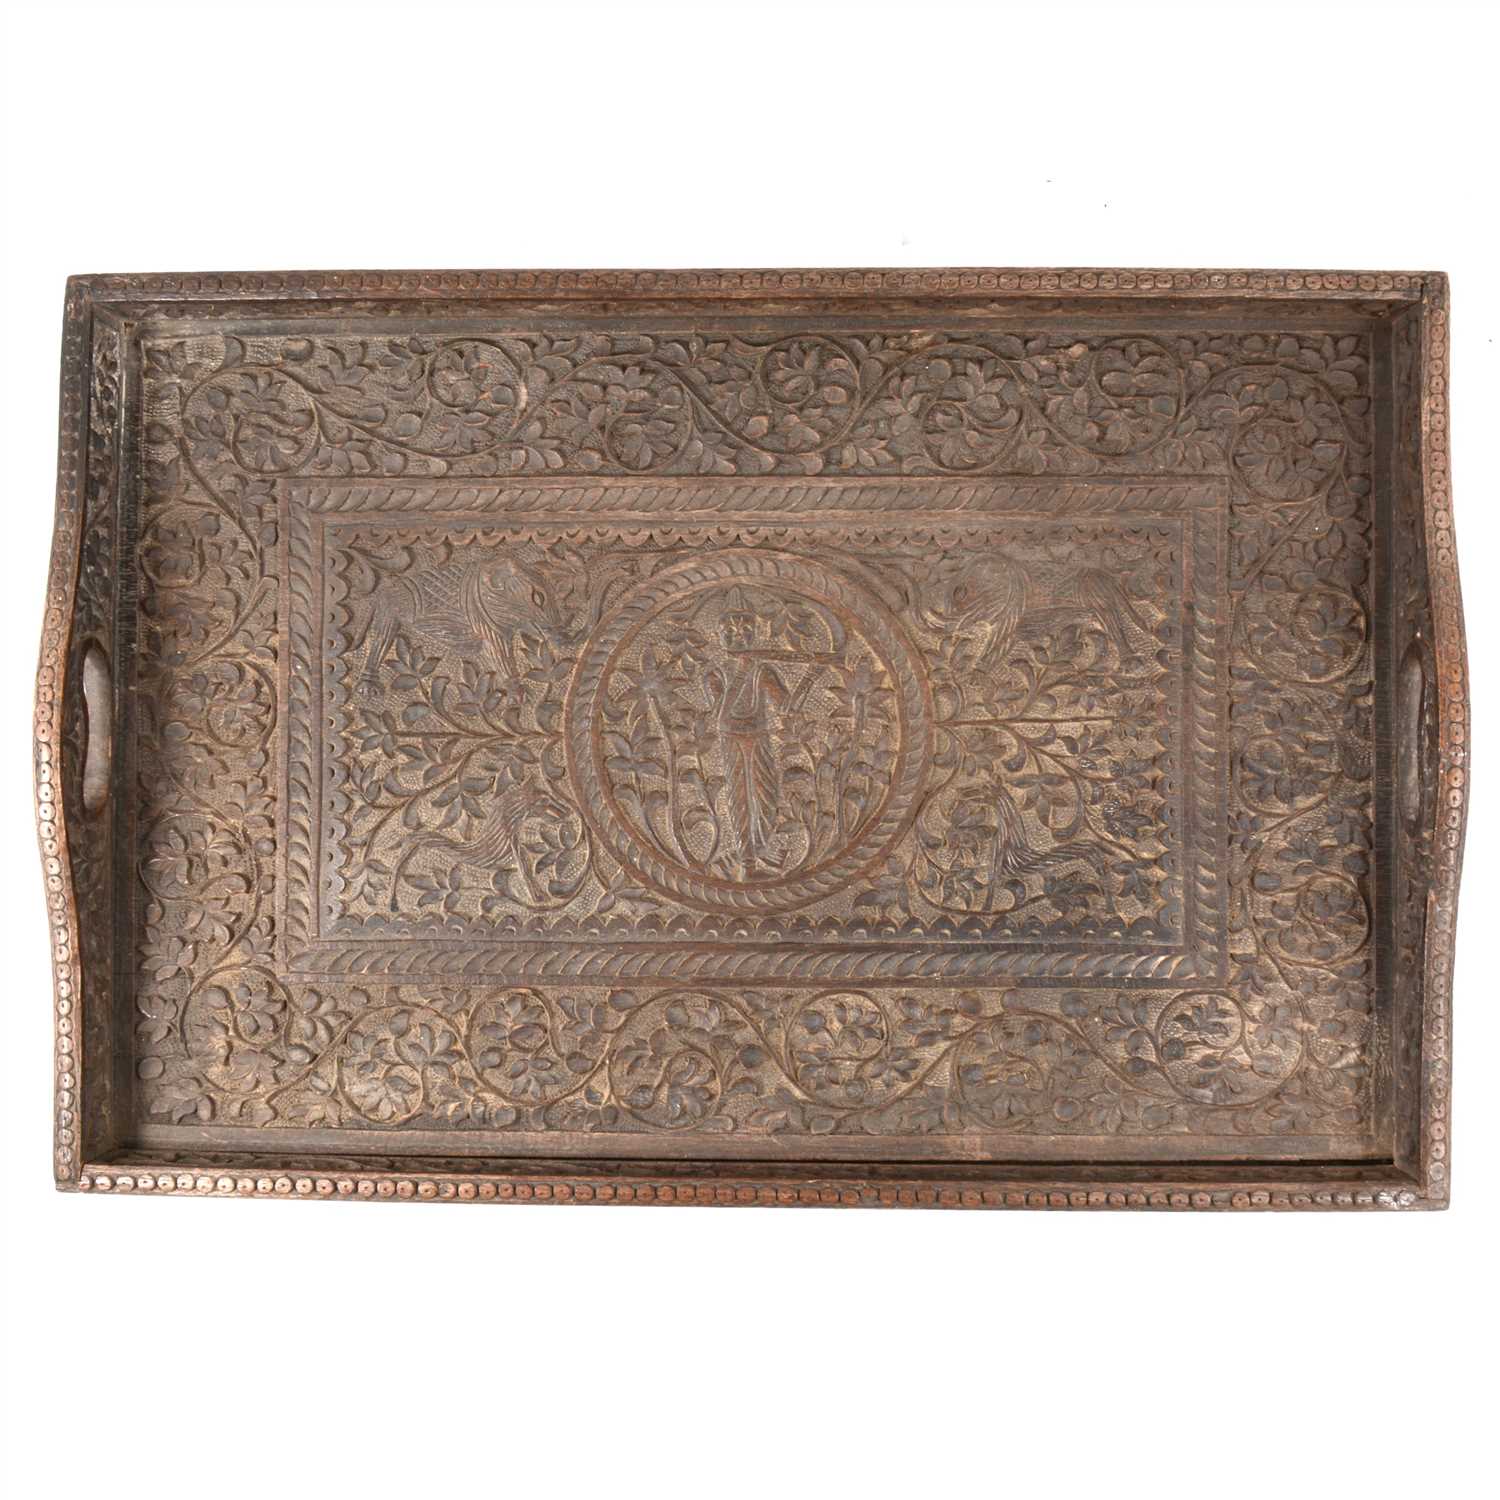 Lot 70 - An Eastern carved wooden tea tray, assorted glassware, and embroidered panels.